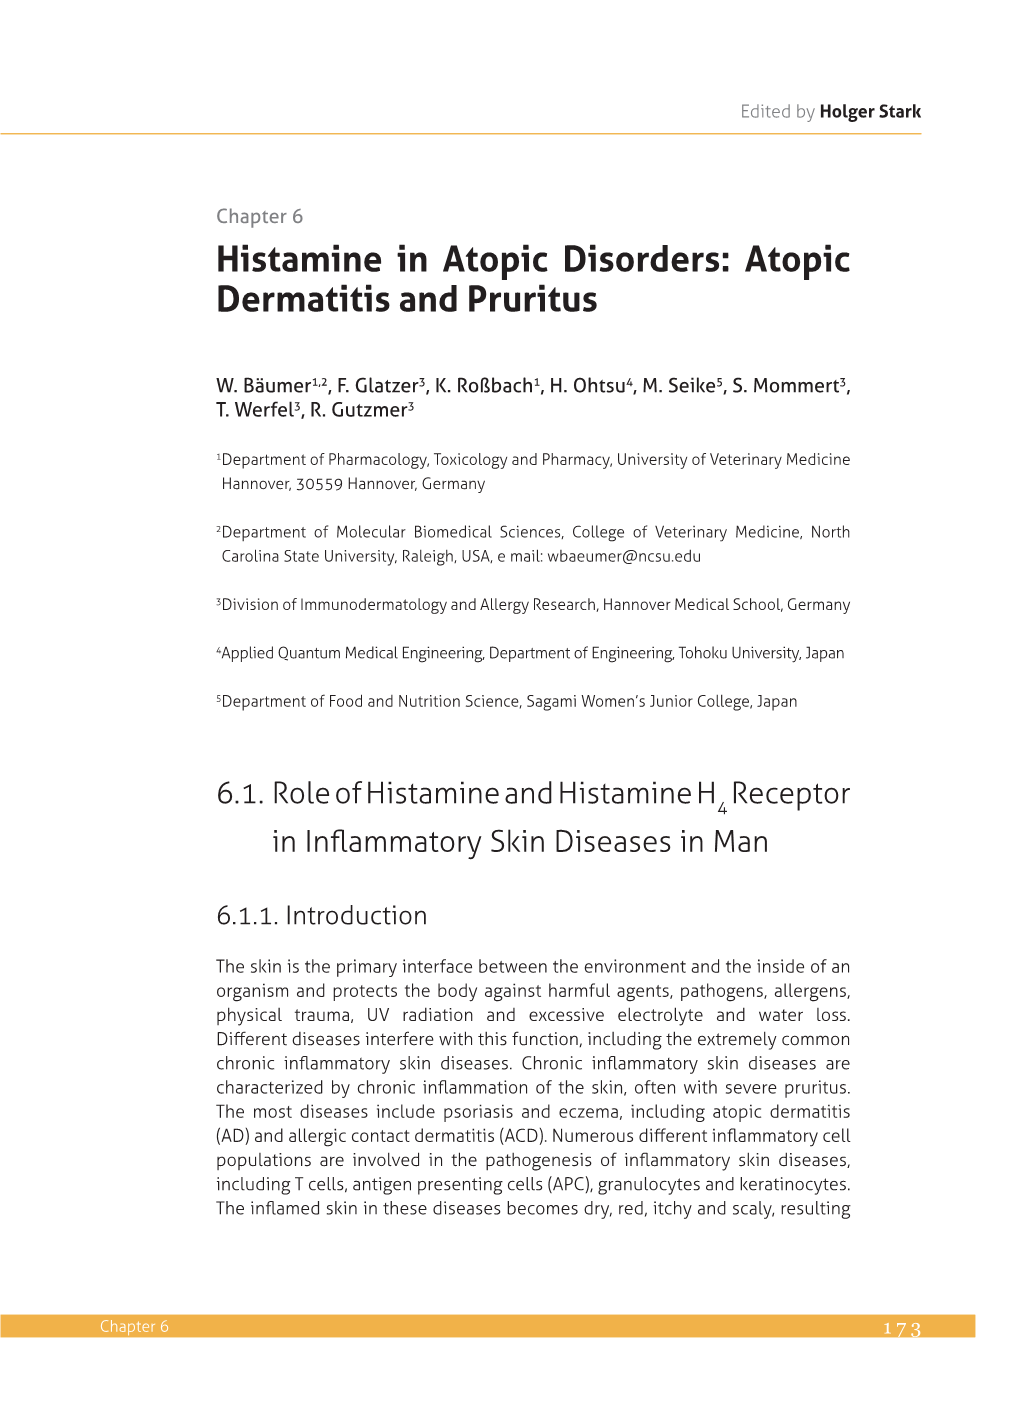 Histamine in Atopic Disorders: Atopic Dermatitis and Pruritus